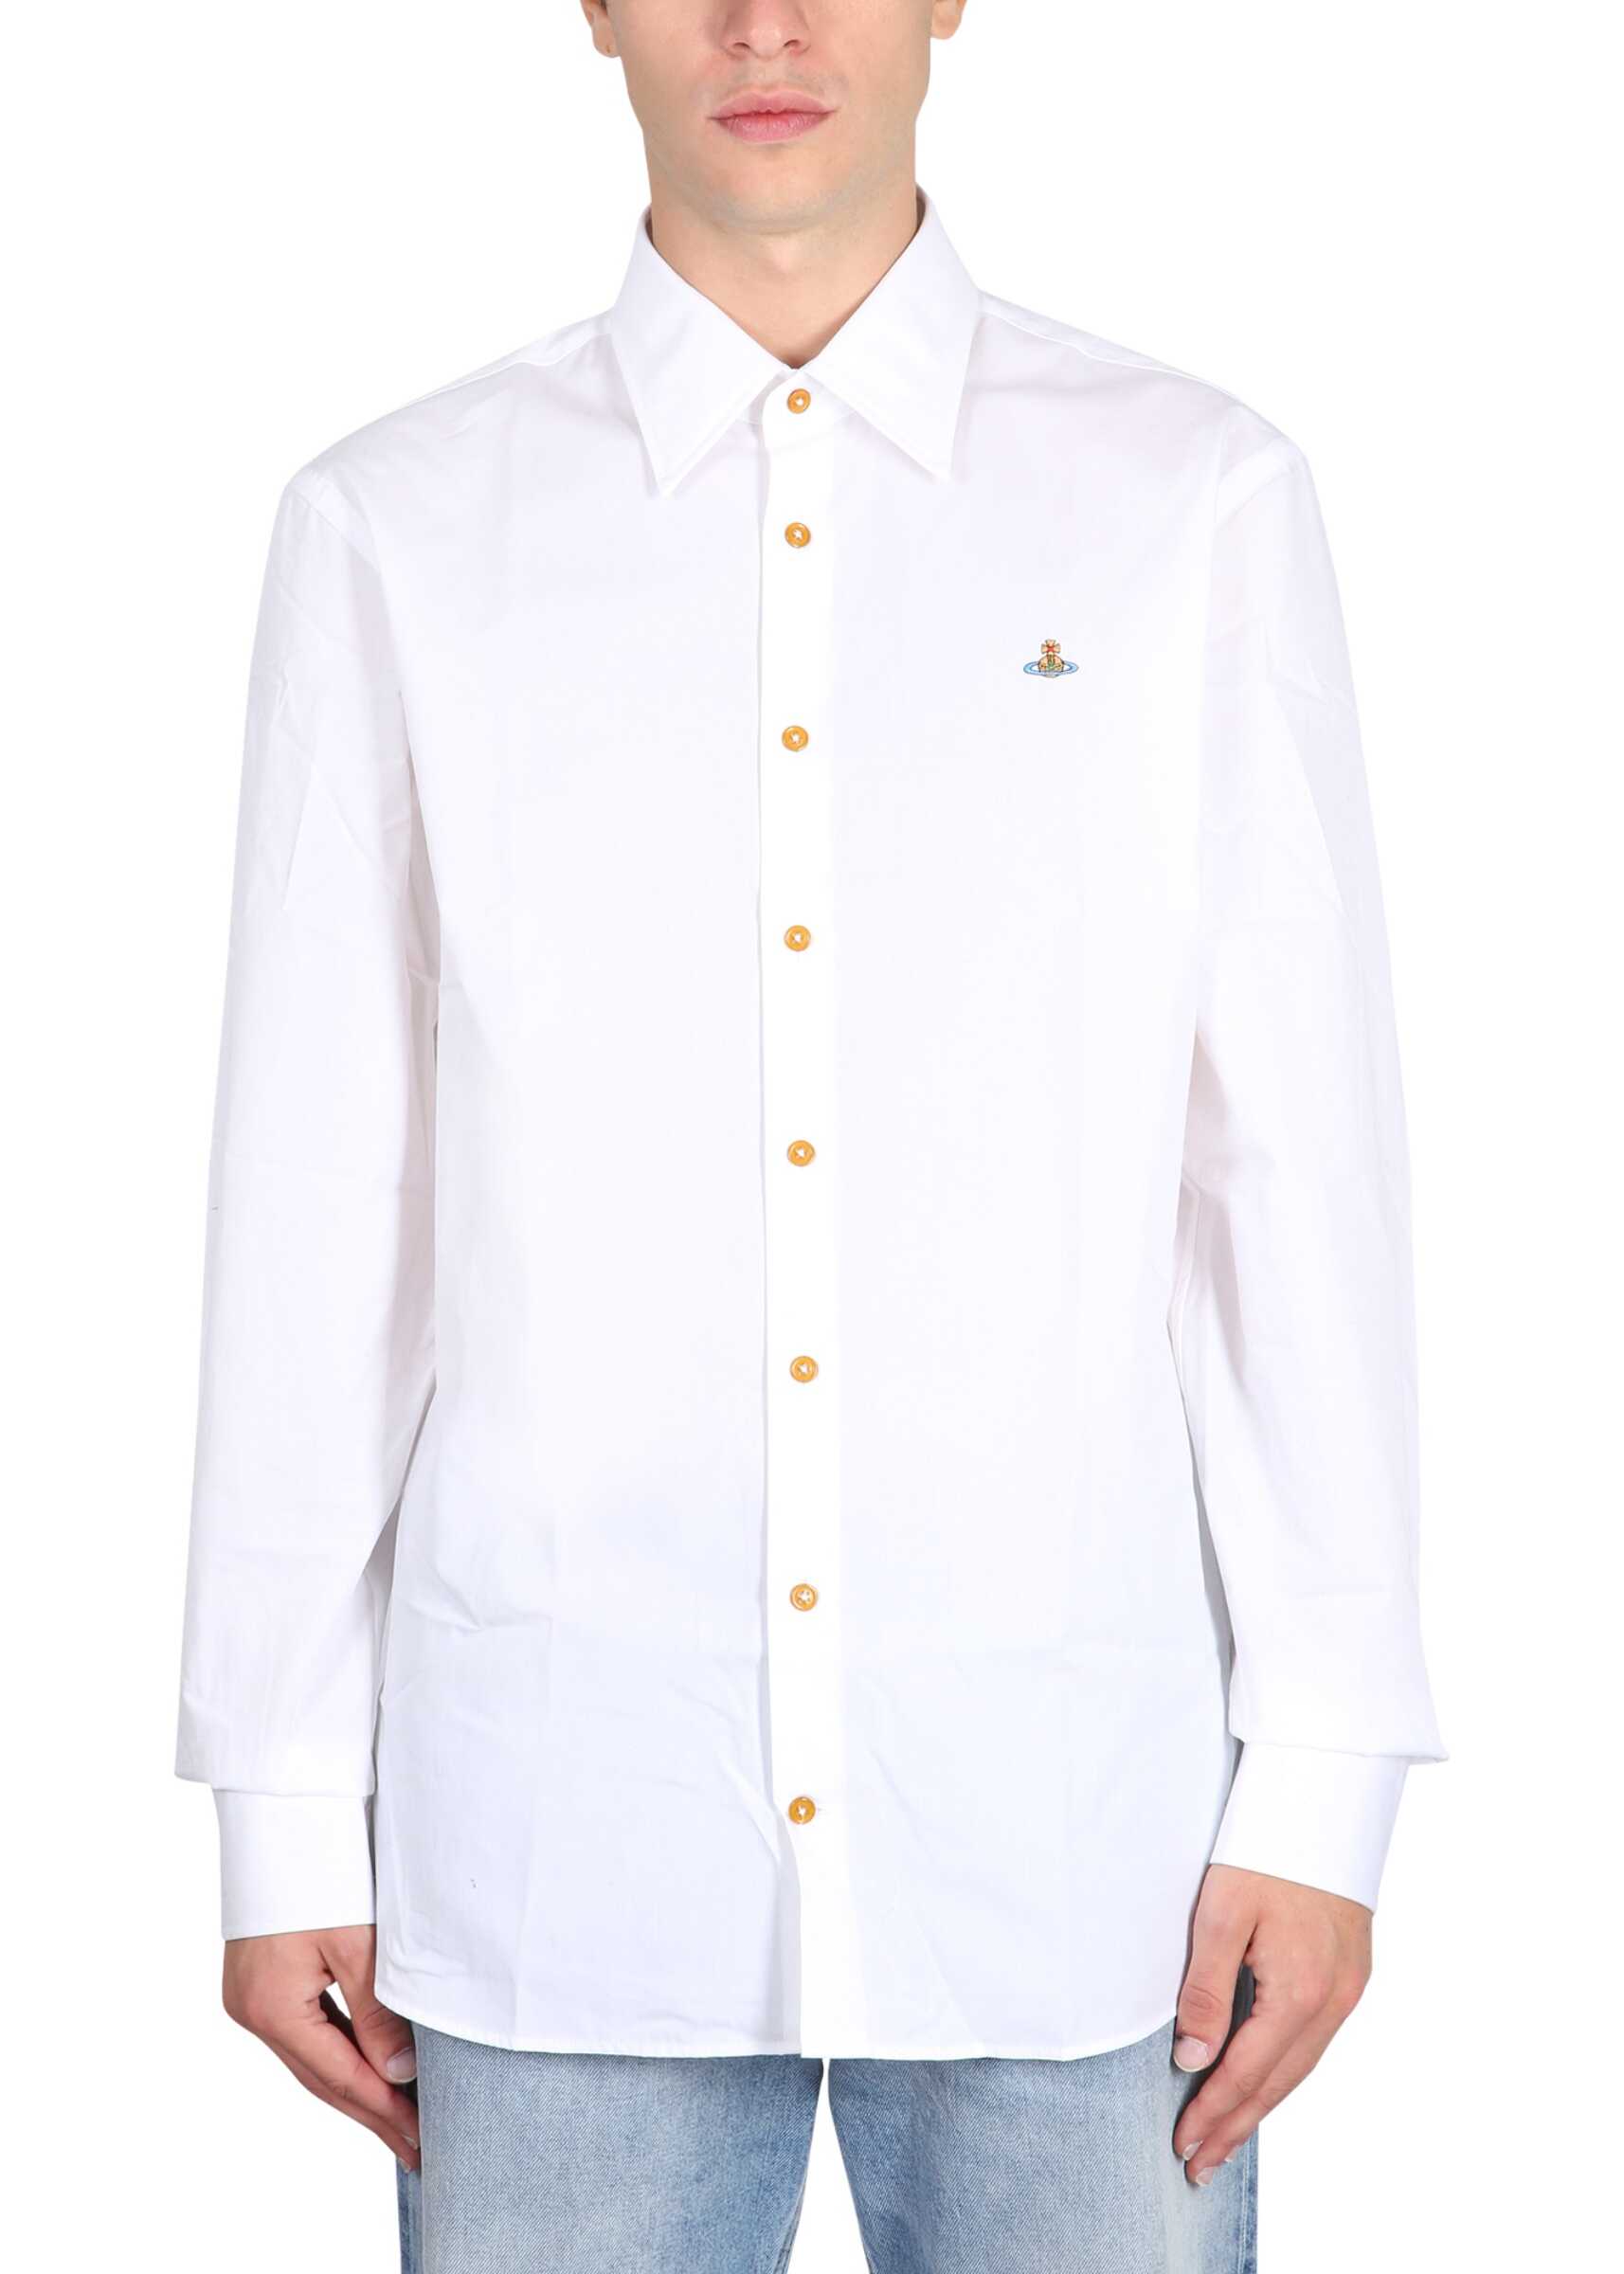 Vivienne Westwood Shirt With Orb Embroidery WHITE